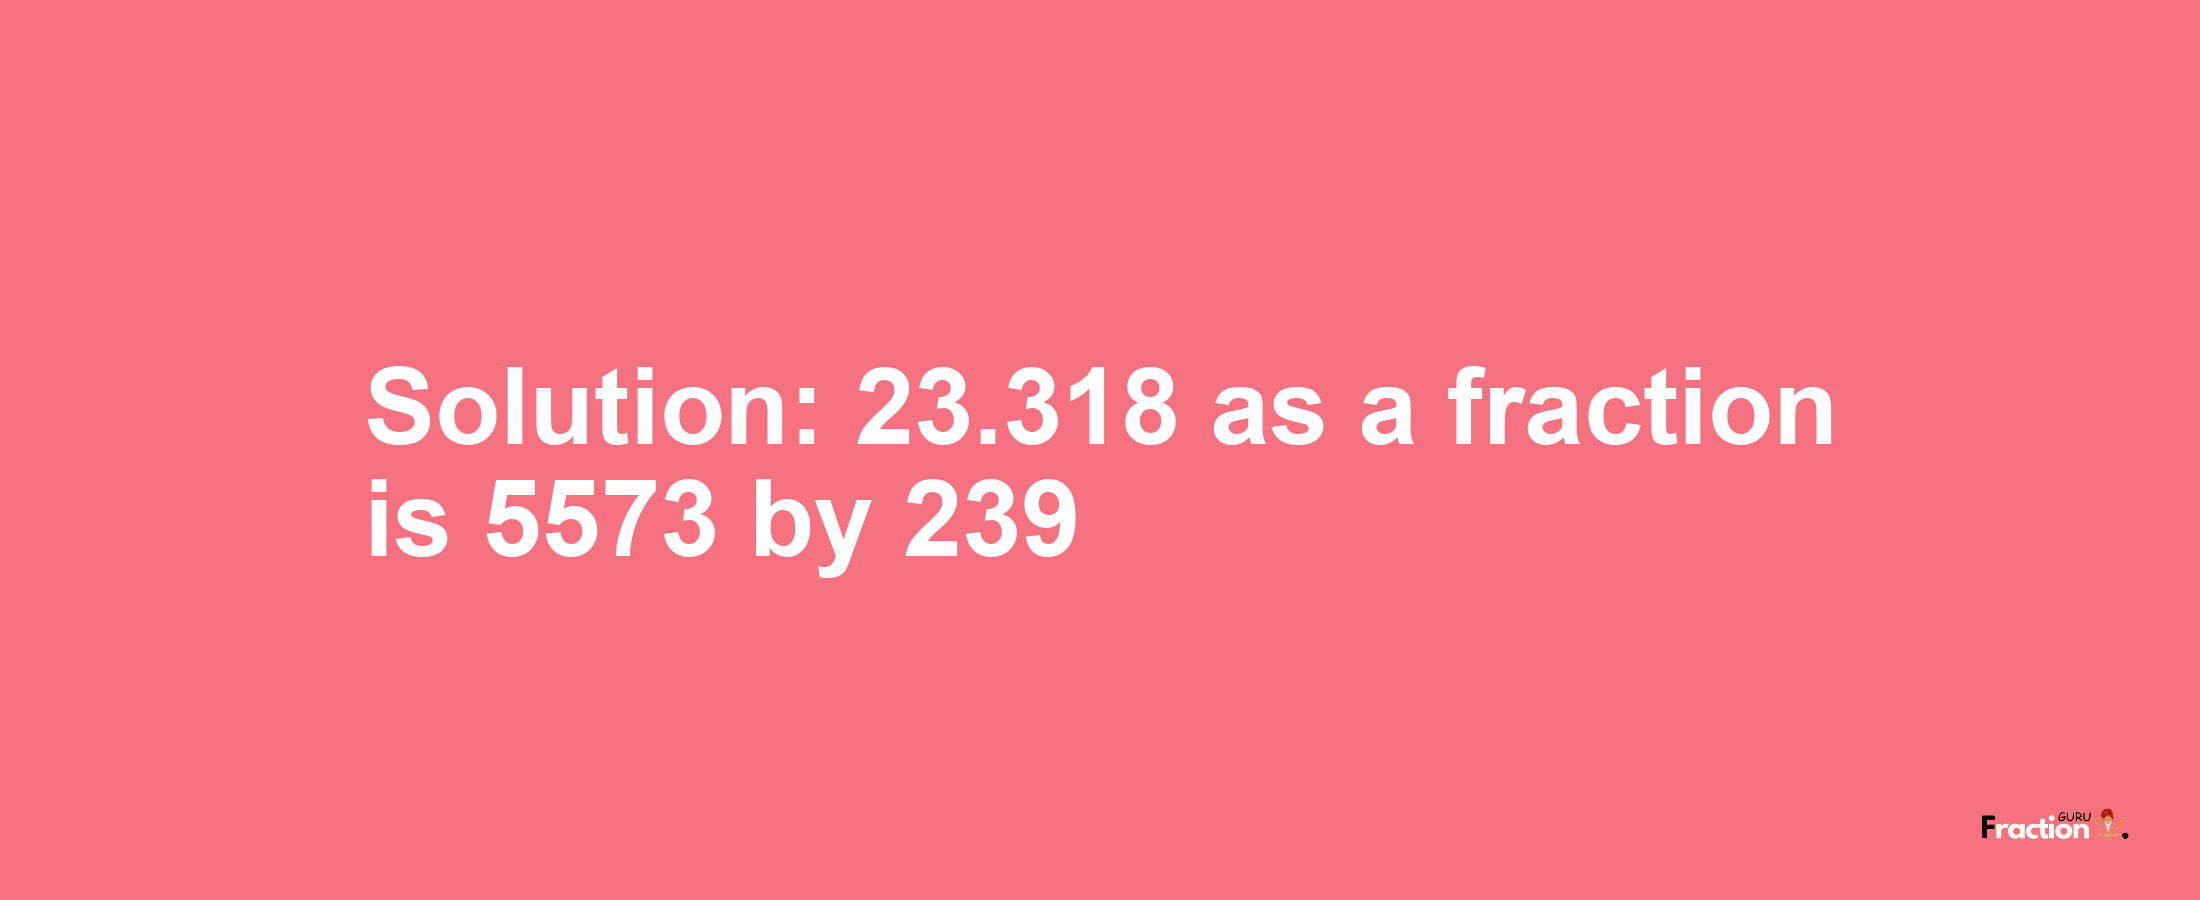 Solution:23.318 as a fraction is 5573/239